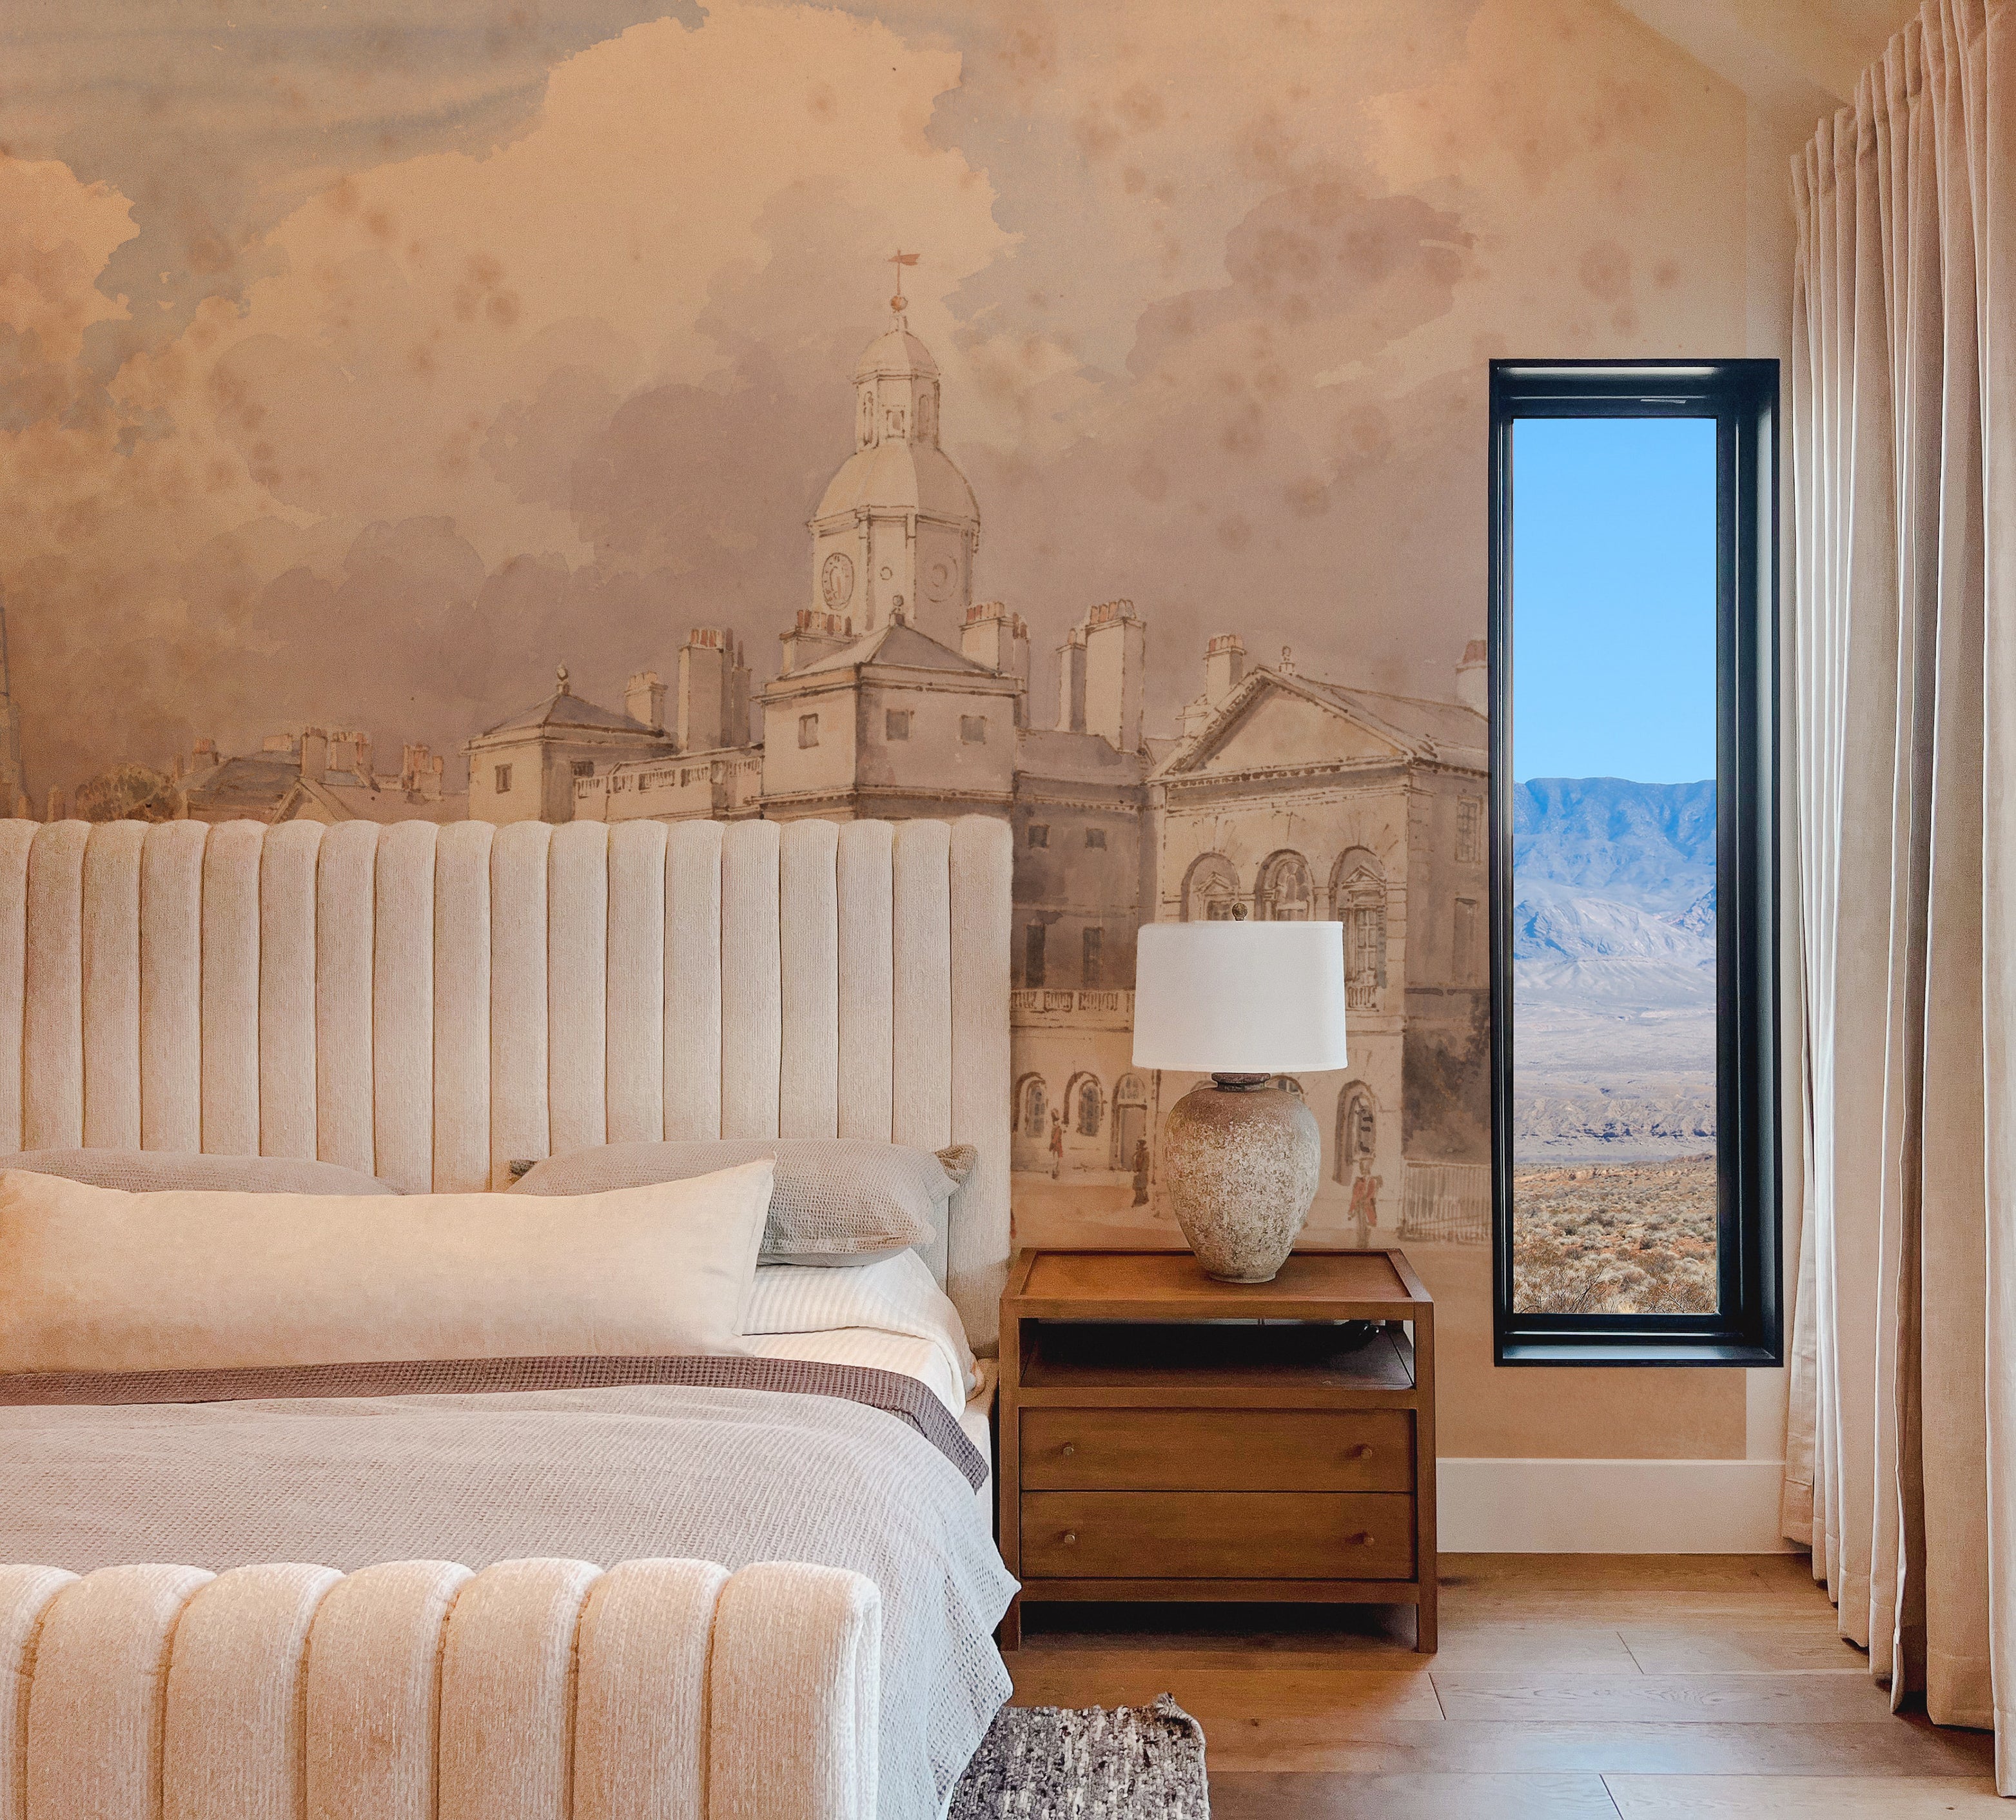 A cozy bedroom showcasing the "Parade" wallpaper mural, featuring a detailed cityscape. The room includes a plush bed, wooden side table, and a large window revealing a distant mountain view, blending indoor artistry with outdoor beauty.